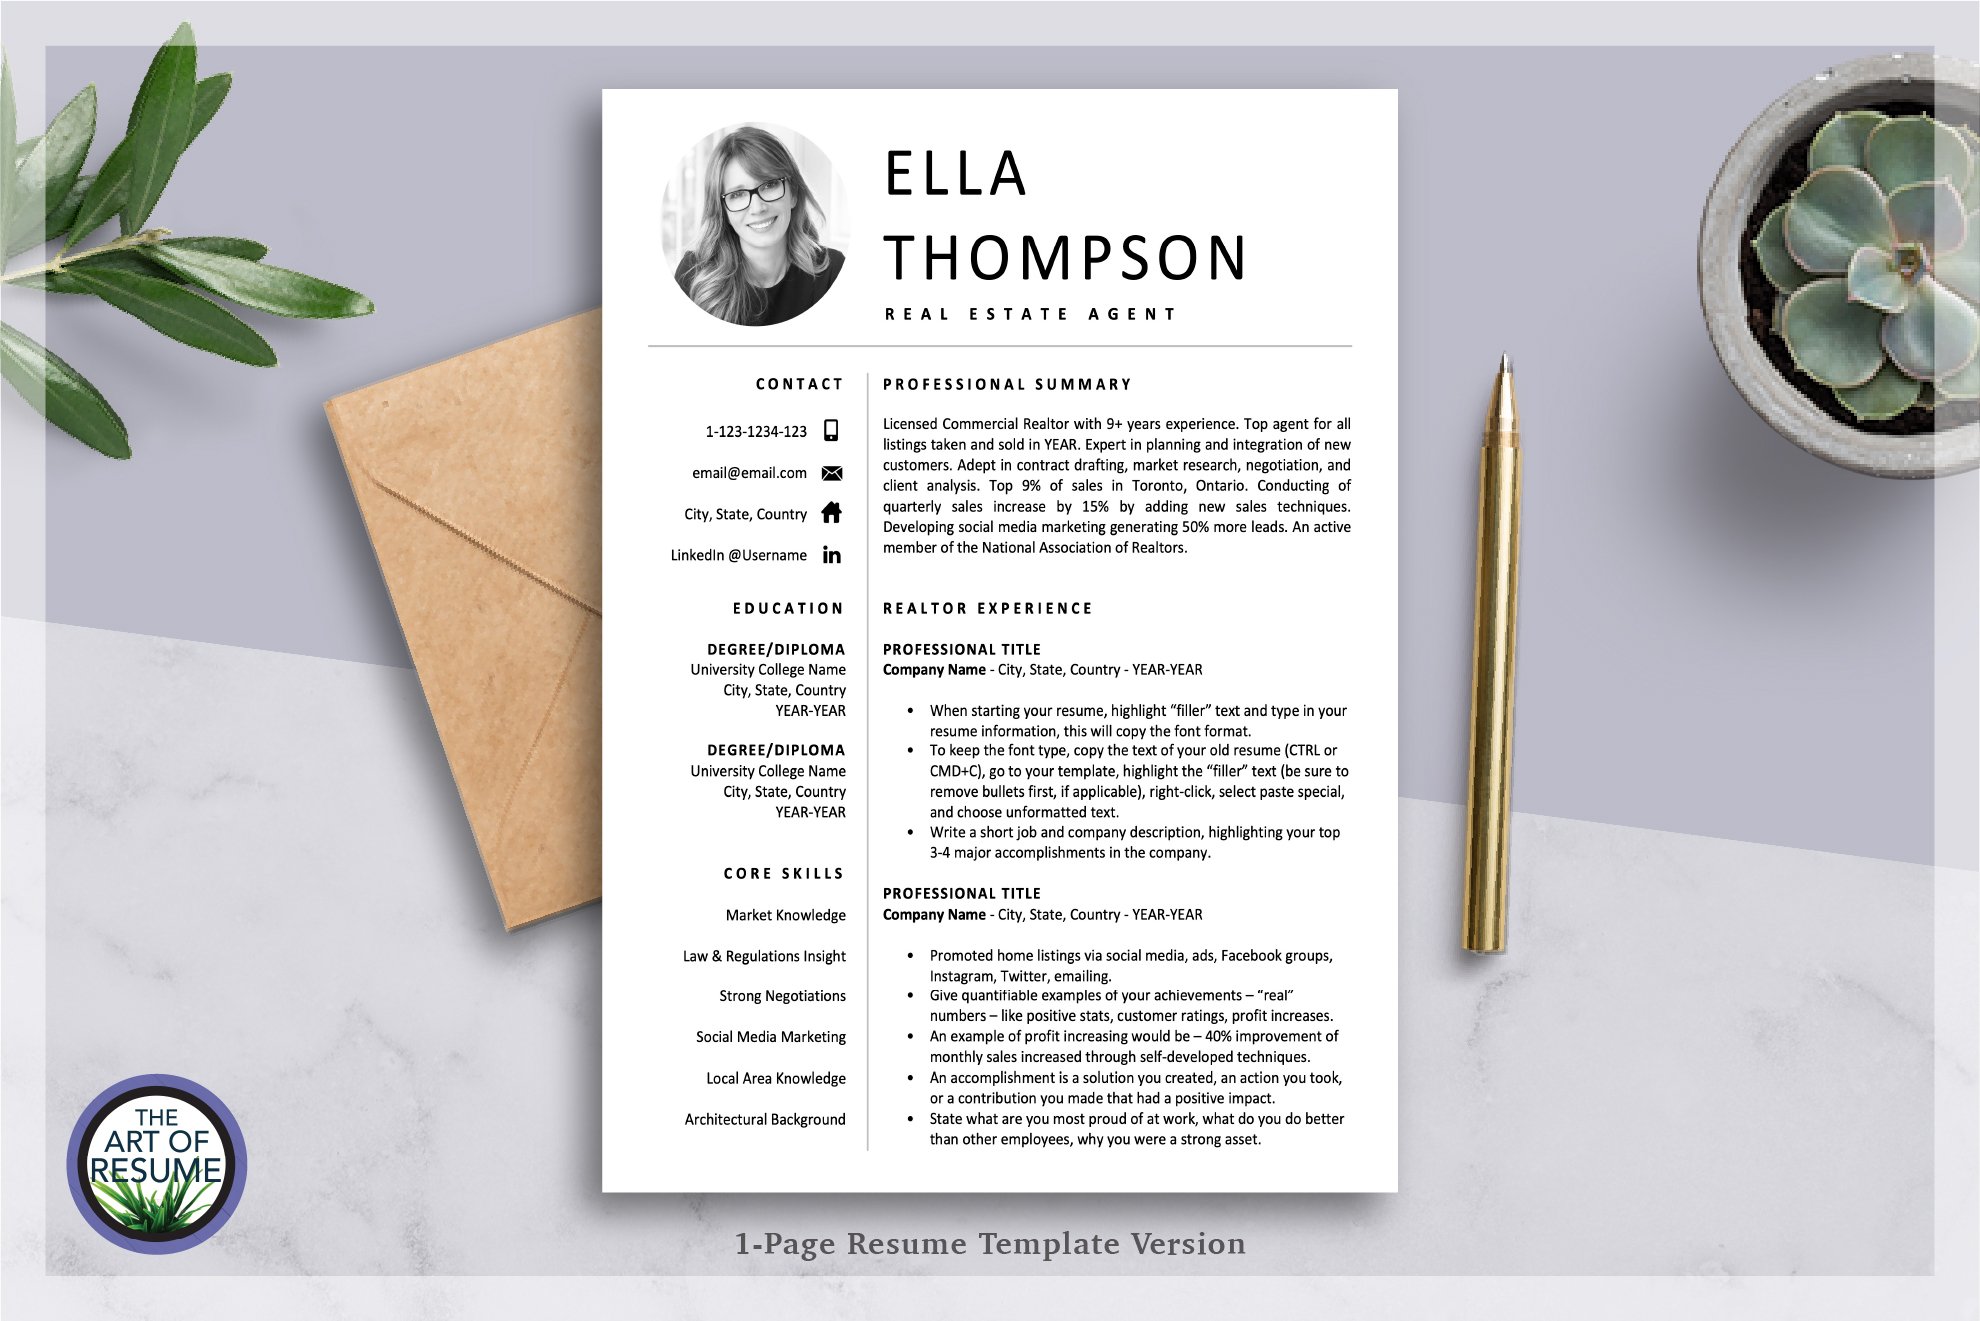 Resume CV Architect, Real Estate preview image.